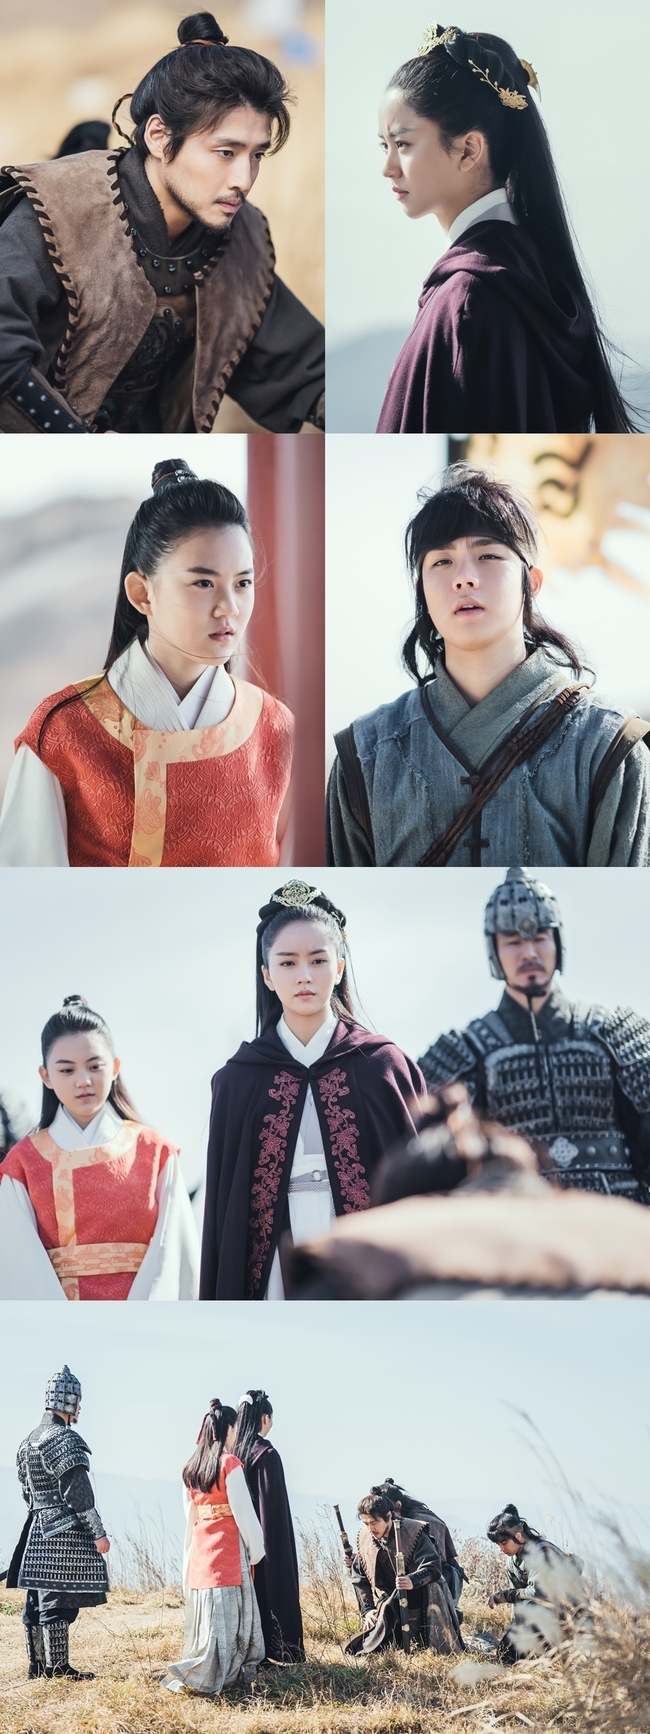 The fateful love of Pyeong-gang and Ondal begins.KBS 2TVs new monthly drama The Moon Rising River (playplayed by Han Ji-hoon/directed by Yoon Sang-ho), which will be broadcast first on February 15, is a fusion historical drama romance that depicts Goguryeos princess Pyeong-gang (Kim So-hyun), who was the whole of her life, and Soon-aebo, who did not give in to the fate of General Ondal (Ji-soo), who made love a history.The River with the Moon is a drama that re-created the story of Pyeong-gang and Ondal in the Goguryeo tale that everyone knows.The tale will complete a epic poem by filling the unrecorded lines with historical imagination.The production team of The Moon Rising River unveiled a still cut with the first meeting of Pyeong-gang and Ondal on the 14th.The released photos include the queen of the queen Kim So-hyun from the capital of Goguryeo, General Kang Ha-neul, who politely greets Princess Pyeong-gang (Back home), and his son Ondal (SEO Hyon).They feel the difference in their status in the appearance of the Ondal and the Ondal, who kneel down to the queen and the princess.This captured the queen and Pyeong-gang who left the cruise, and the general who met them was the chief of the Sunnobu who guarded the southern border.The expression of the sincere queen and the general of the Korean Confederation raises the question of their meeting. Why did Queen Yan travel with the princess to such a long border?Why is the depth of water filled with the face of Queen Yeon and General Onhyup?In addition, the expression of Pyeong-gang and Ondal, which are opposite to the queen and the onslaught, attracts attention.In the appearance of Pyeong-gang and Ondal, who seem to be dissatisfied somewhere, curiosity is amplified about what happened to their first meeting.